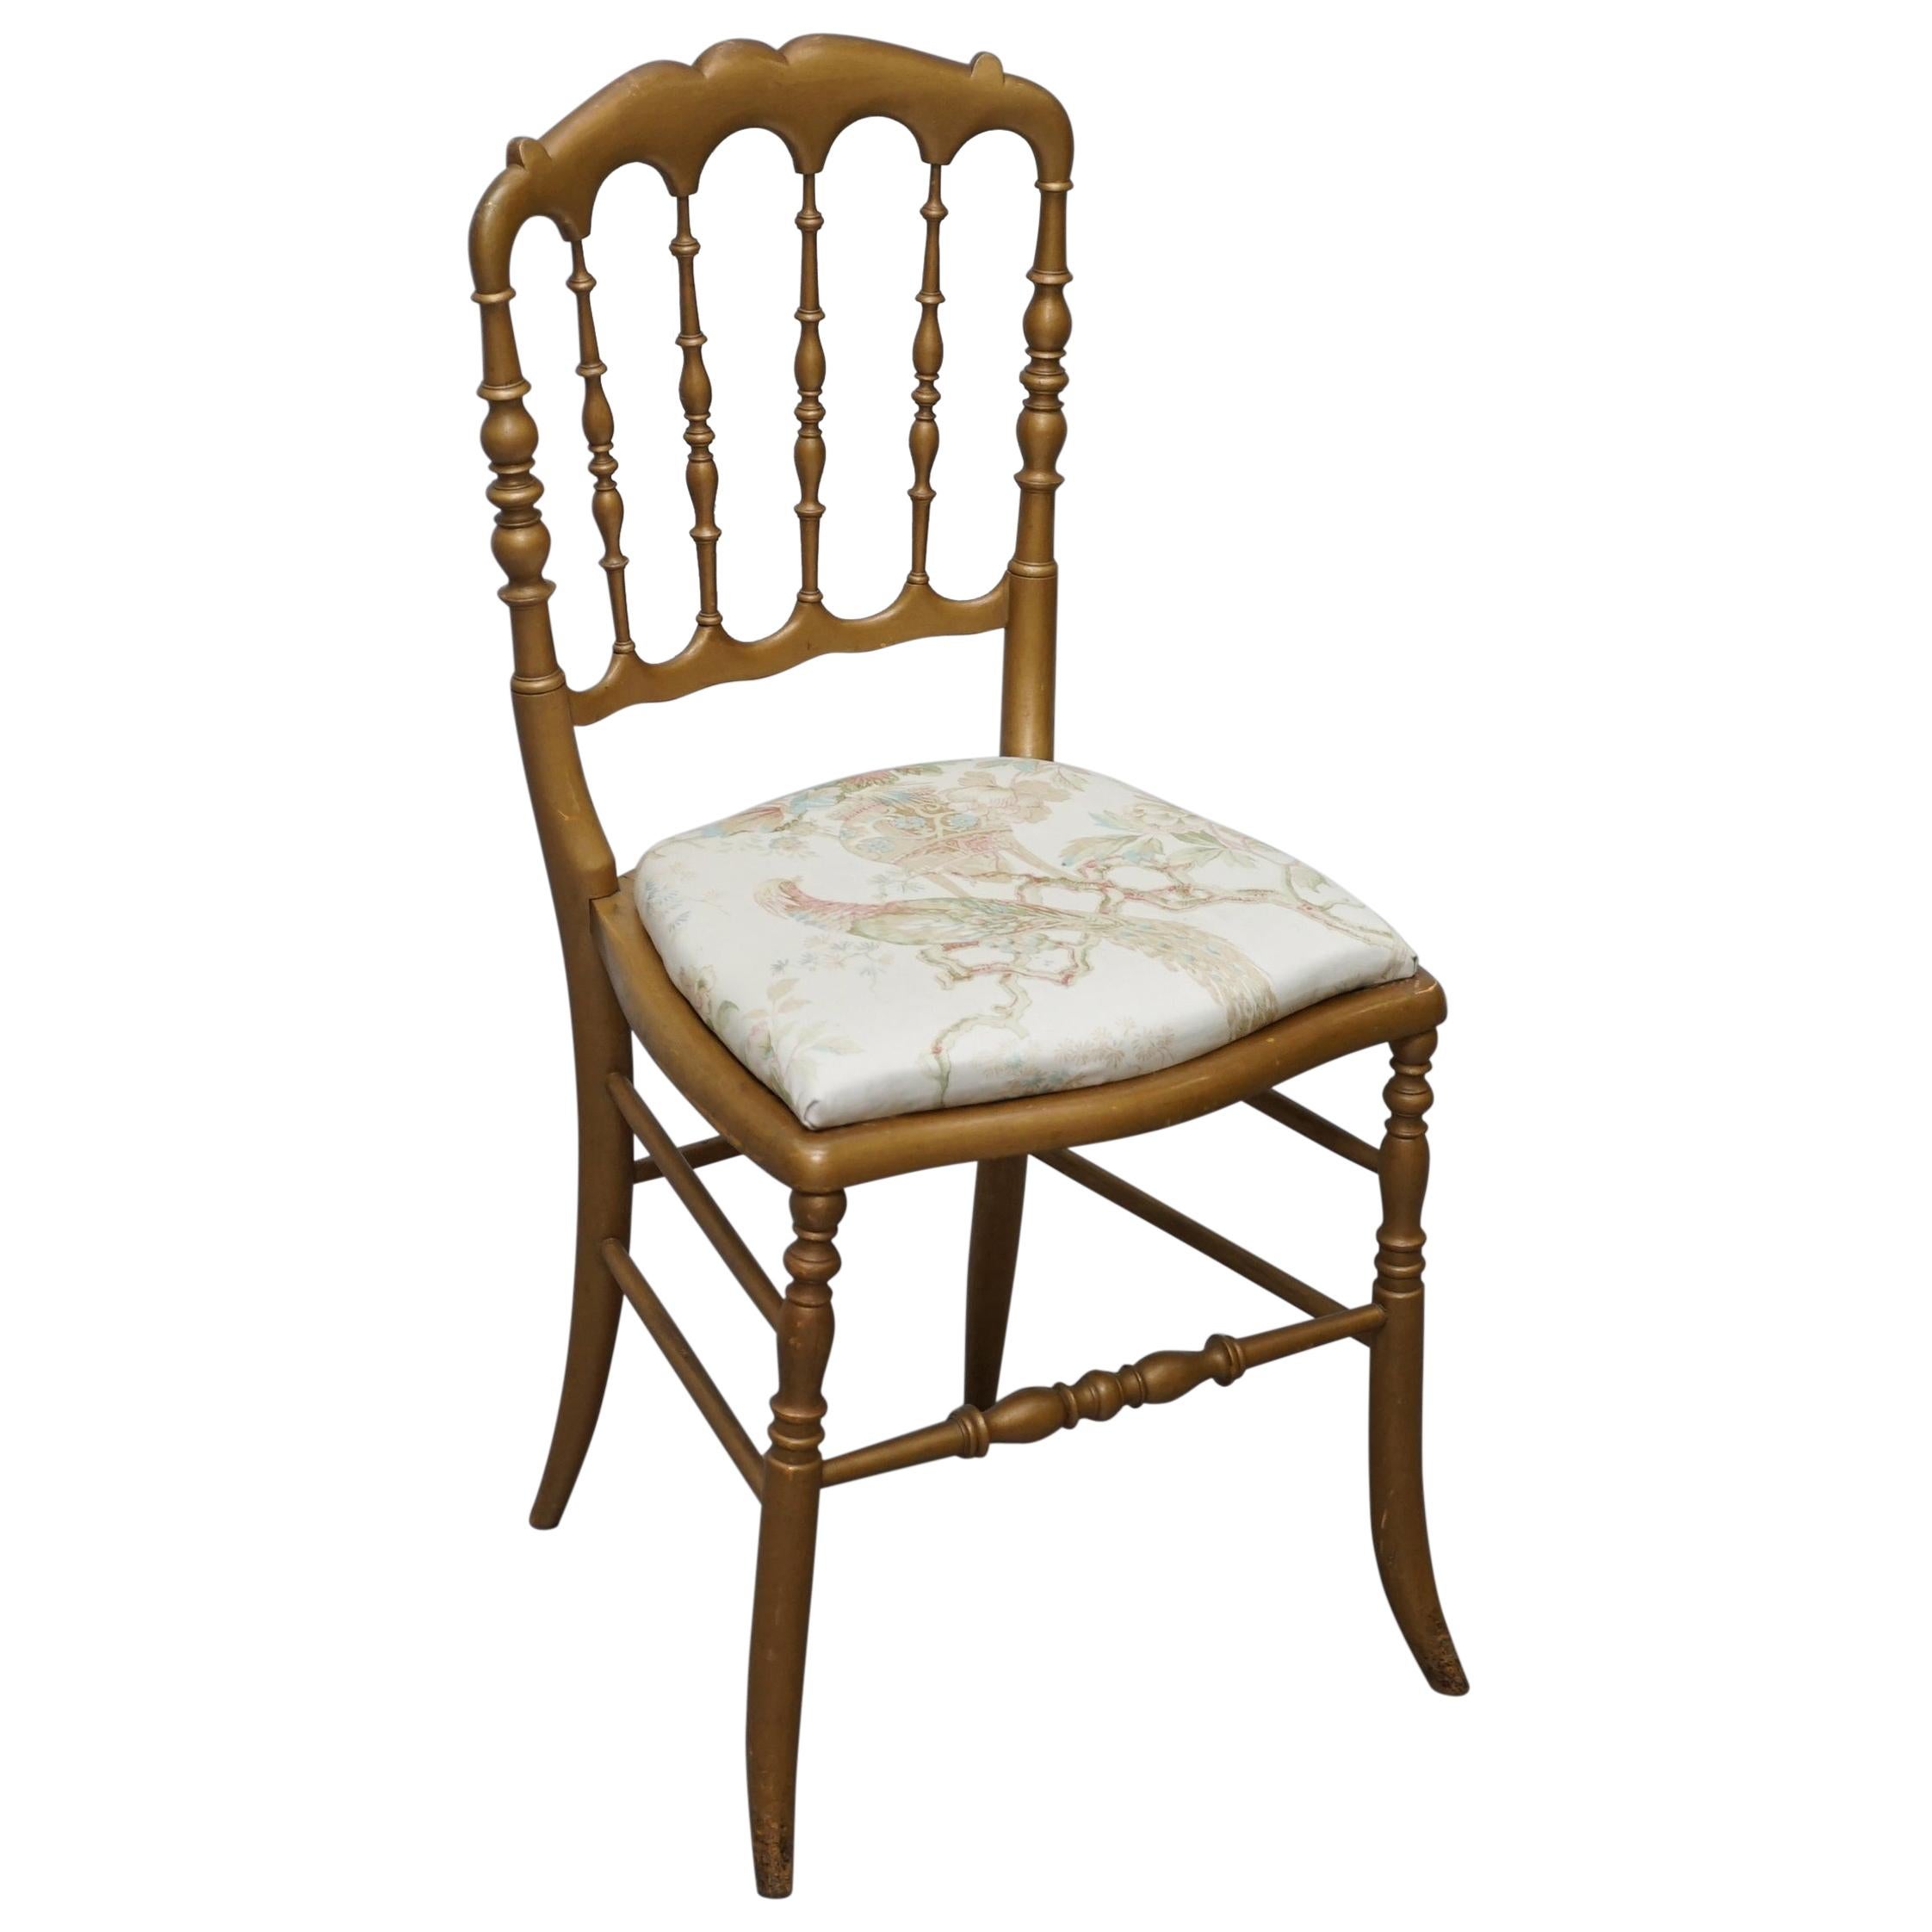 Regency Style Gold Giltwood Spindle Chair circa 1900 Ornate Bird Upholstery For Sale